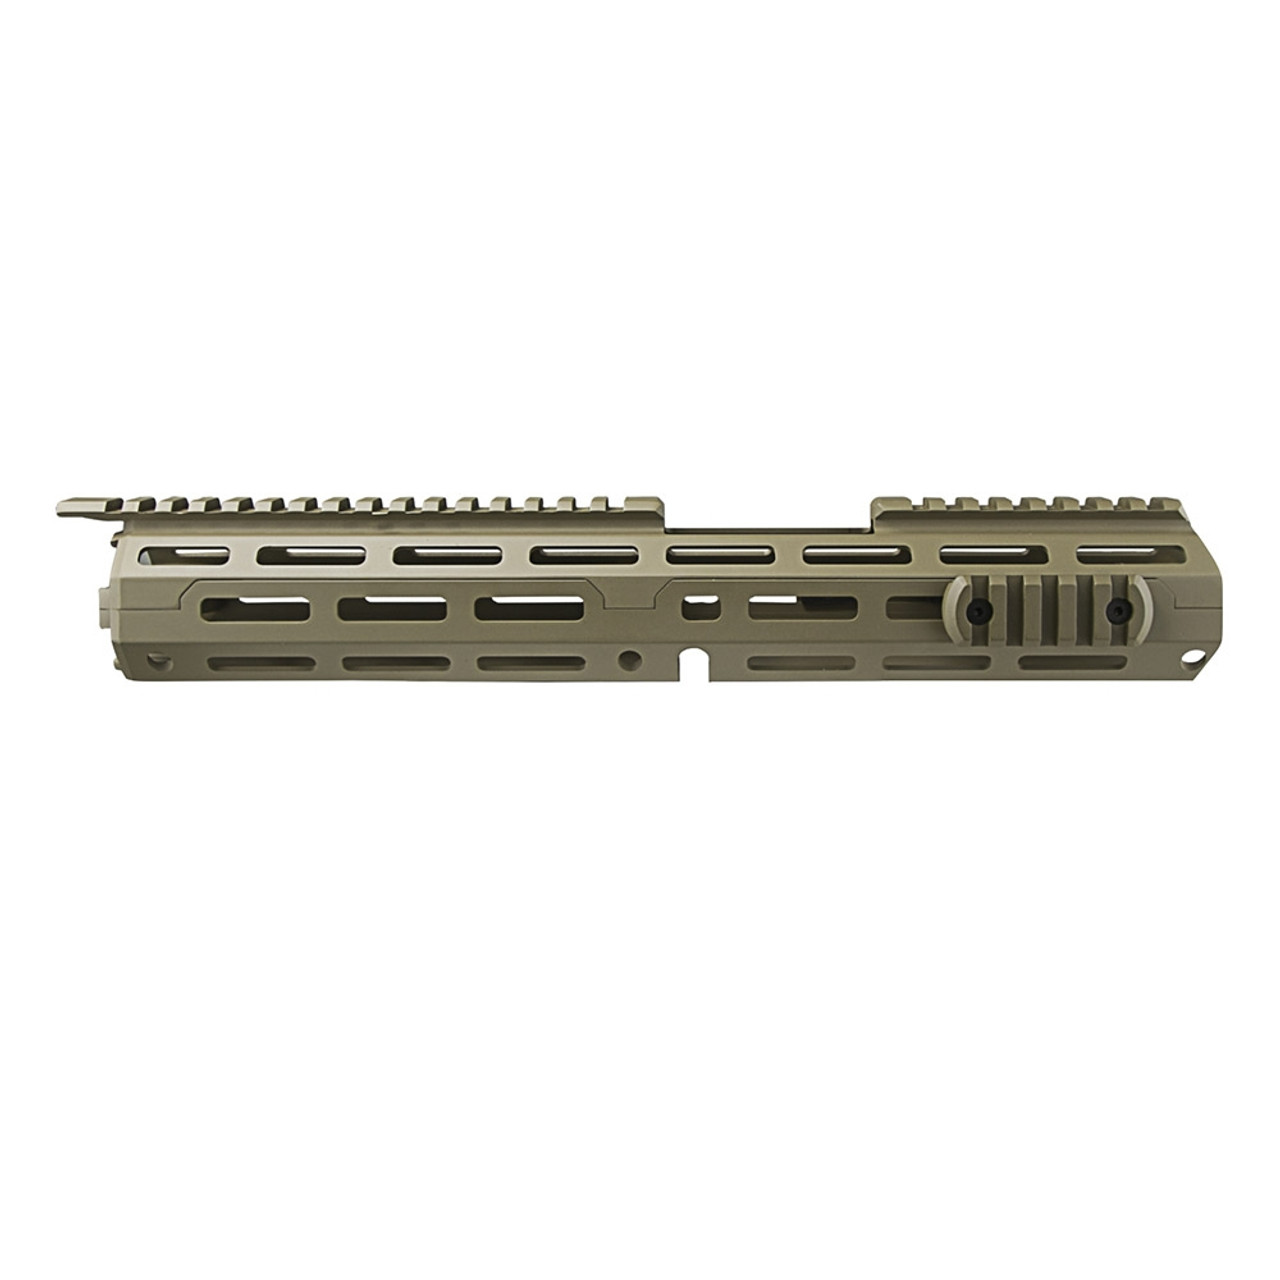 NcSTAR VMARMLCET 223/556  M-Lok Handguard/ Two Piece/ Drop In Fit/ Extended Length/ 13.5"L Tan